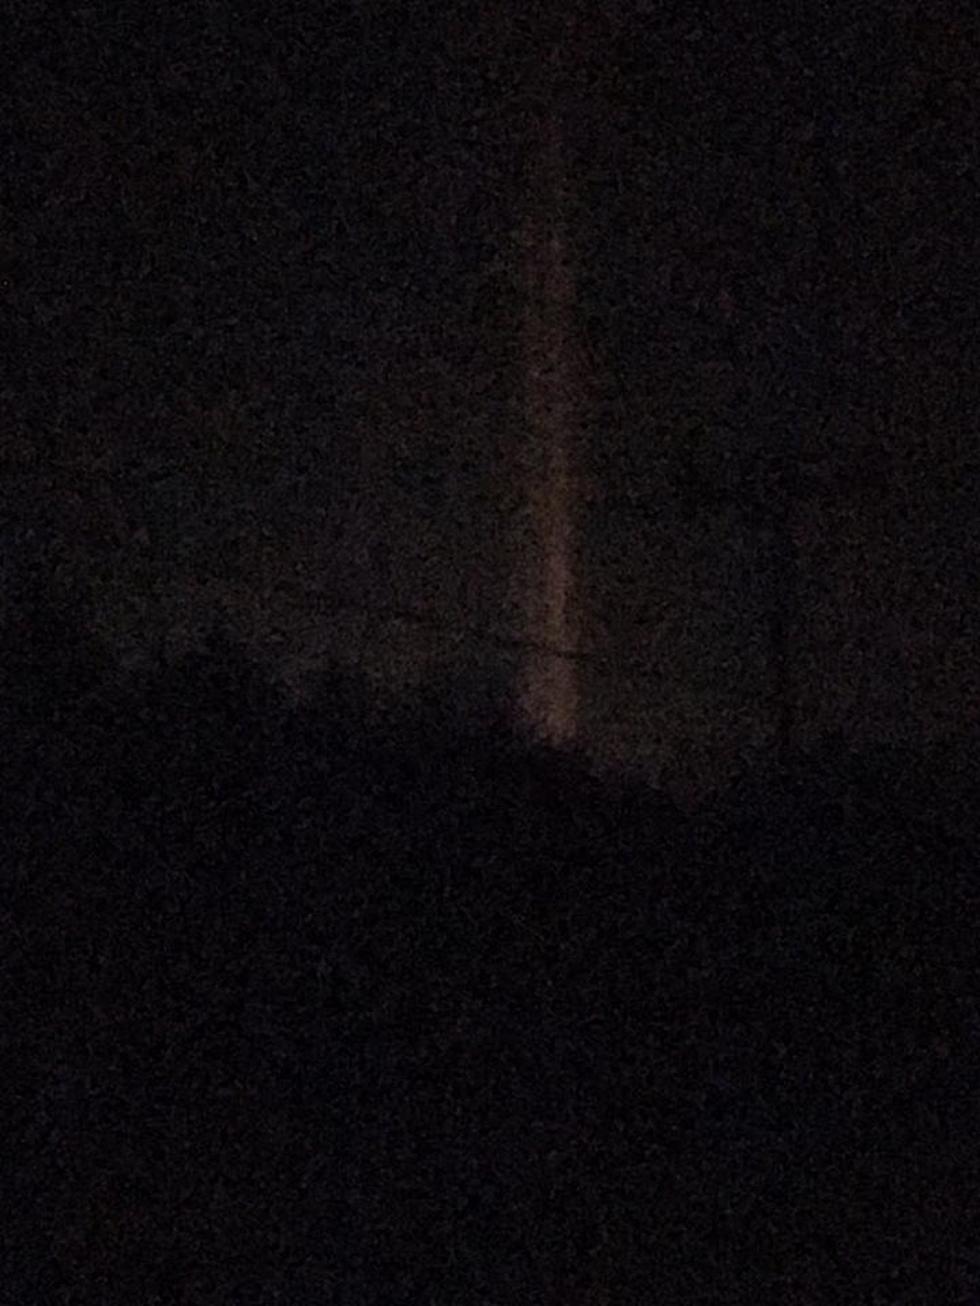 What Are These Strange Lights Over Barneveld?